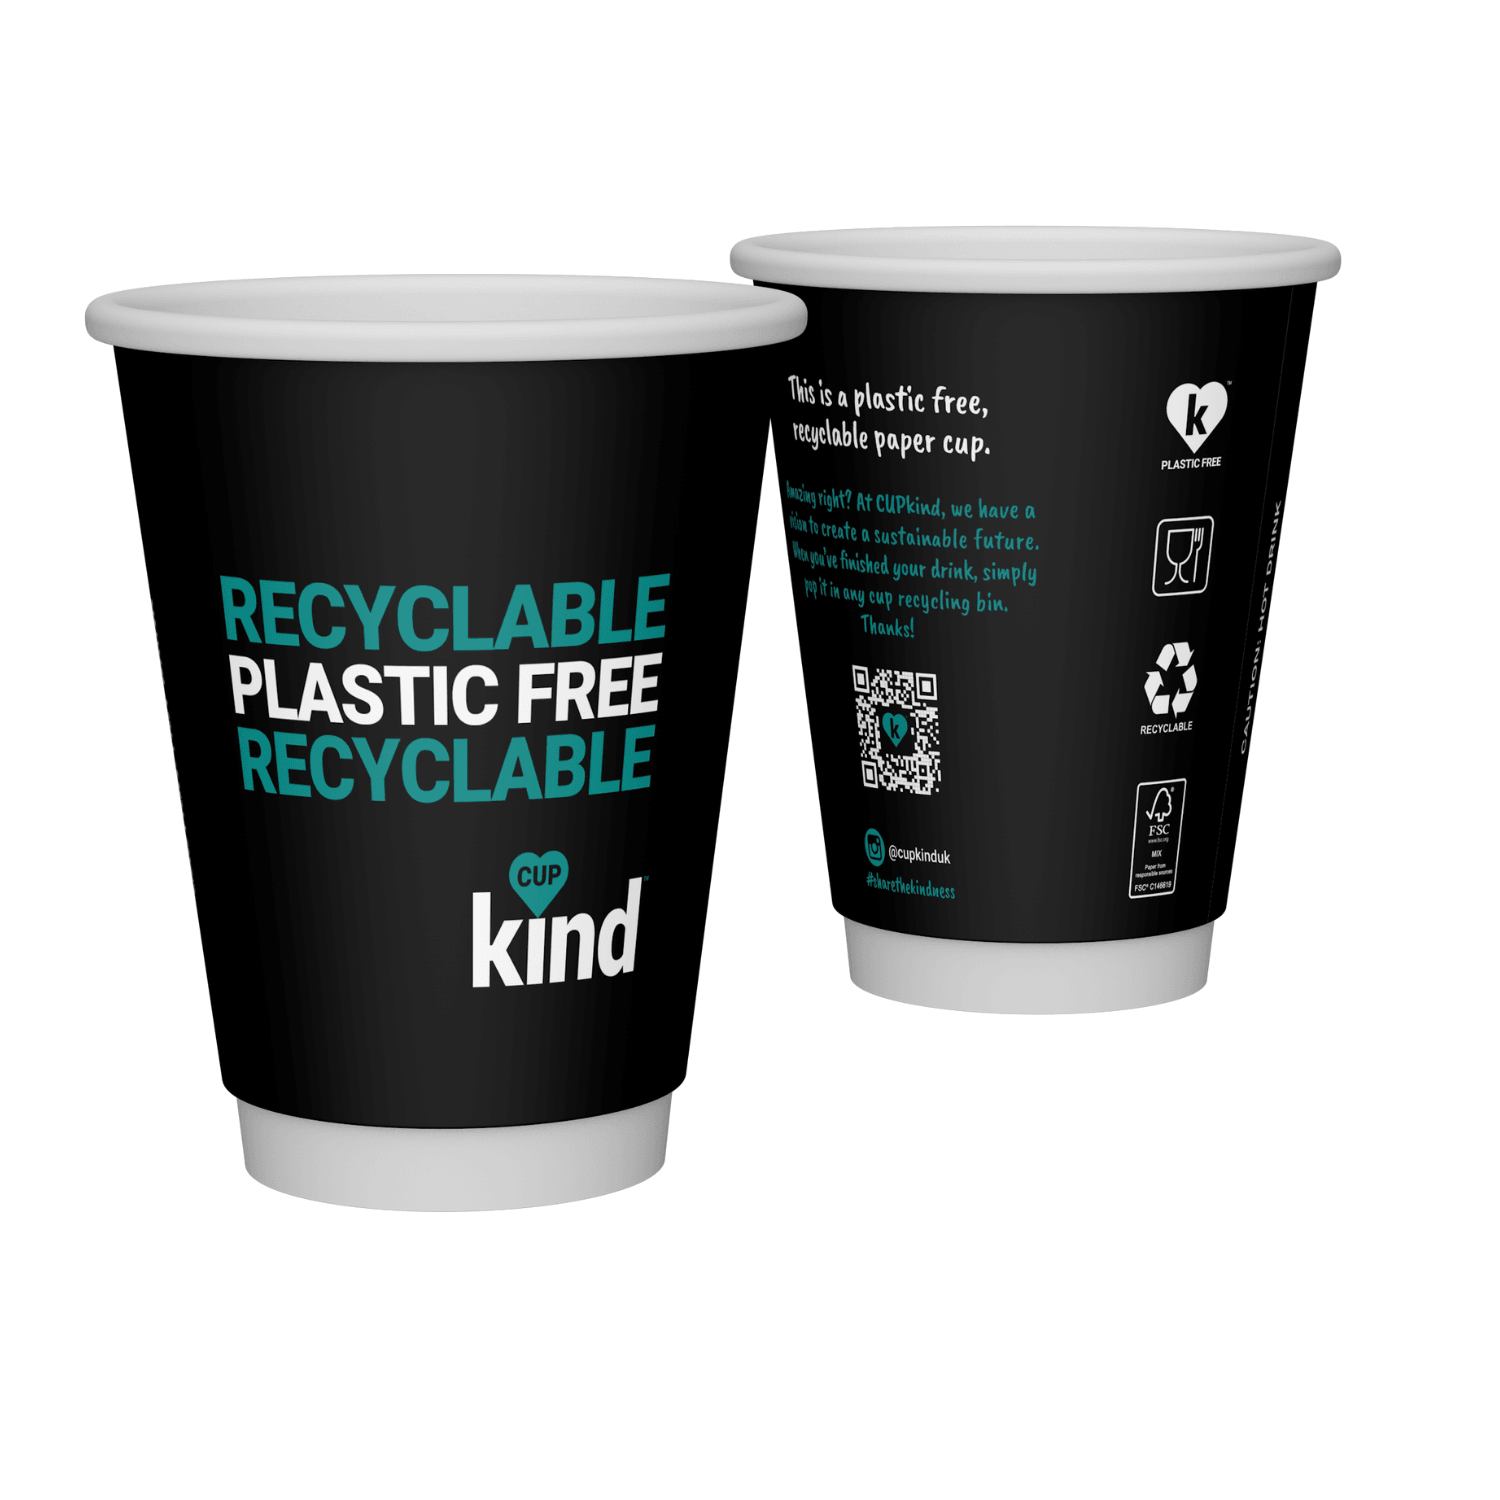 Cup Kind Double Walled Takeaway Coffee Cups - Biodegradable, Compostable, Plastic Free - Choose from 8oz, 12oz, 16oz - Case of 500 or Sleeve of 25 - Vending Superstore